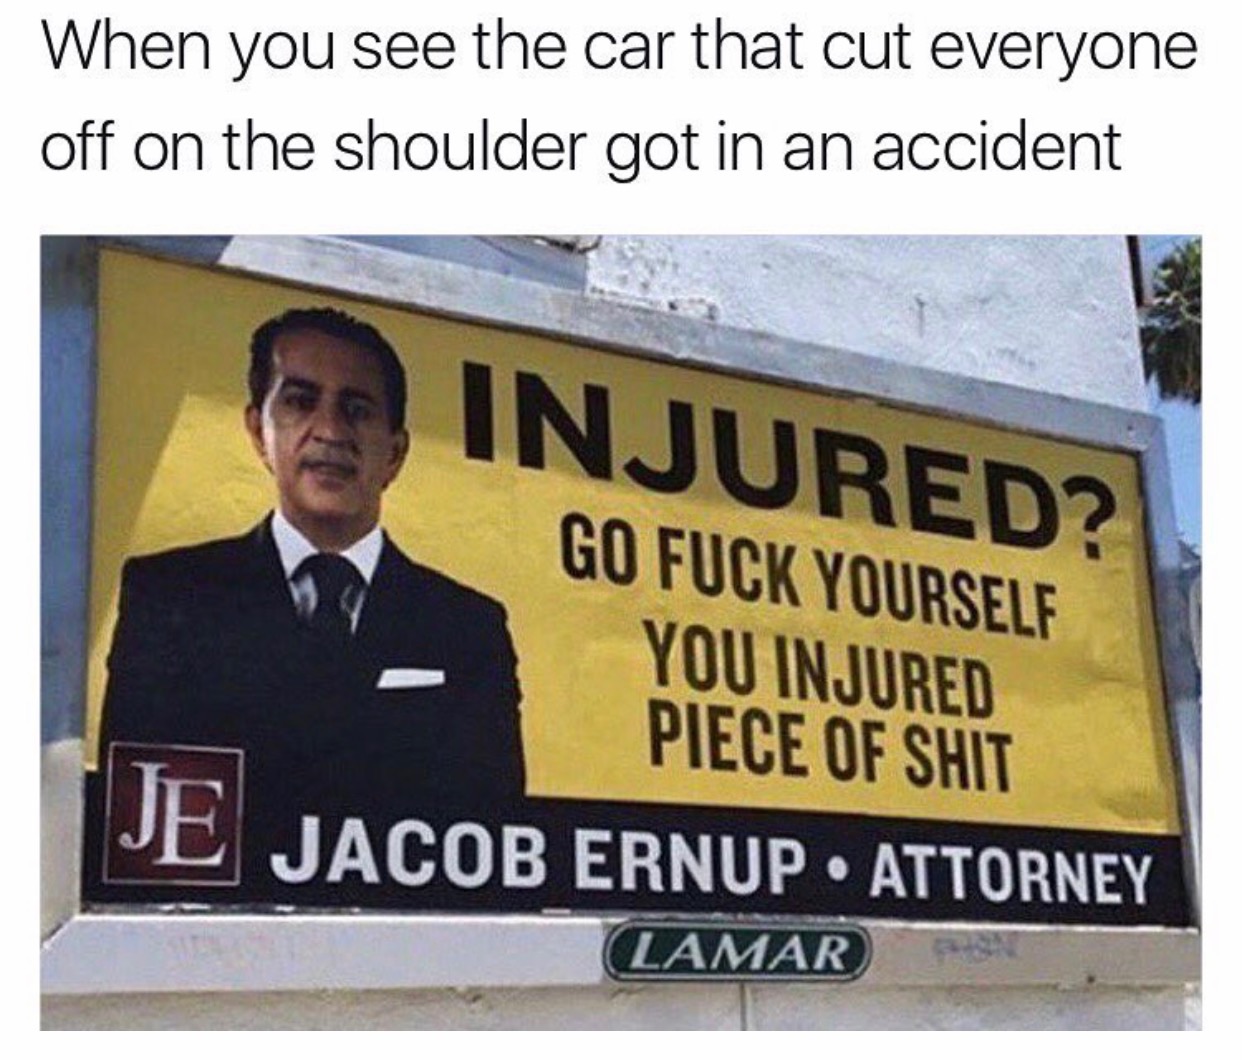 memes - billboard - When you see the car that cut everyone off on the shoulder got in an accident Injured? Go Fuck Yourself You Injured Piece Of Shit Pe Jacob Ernup Attorney Lamar